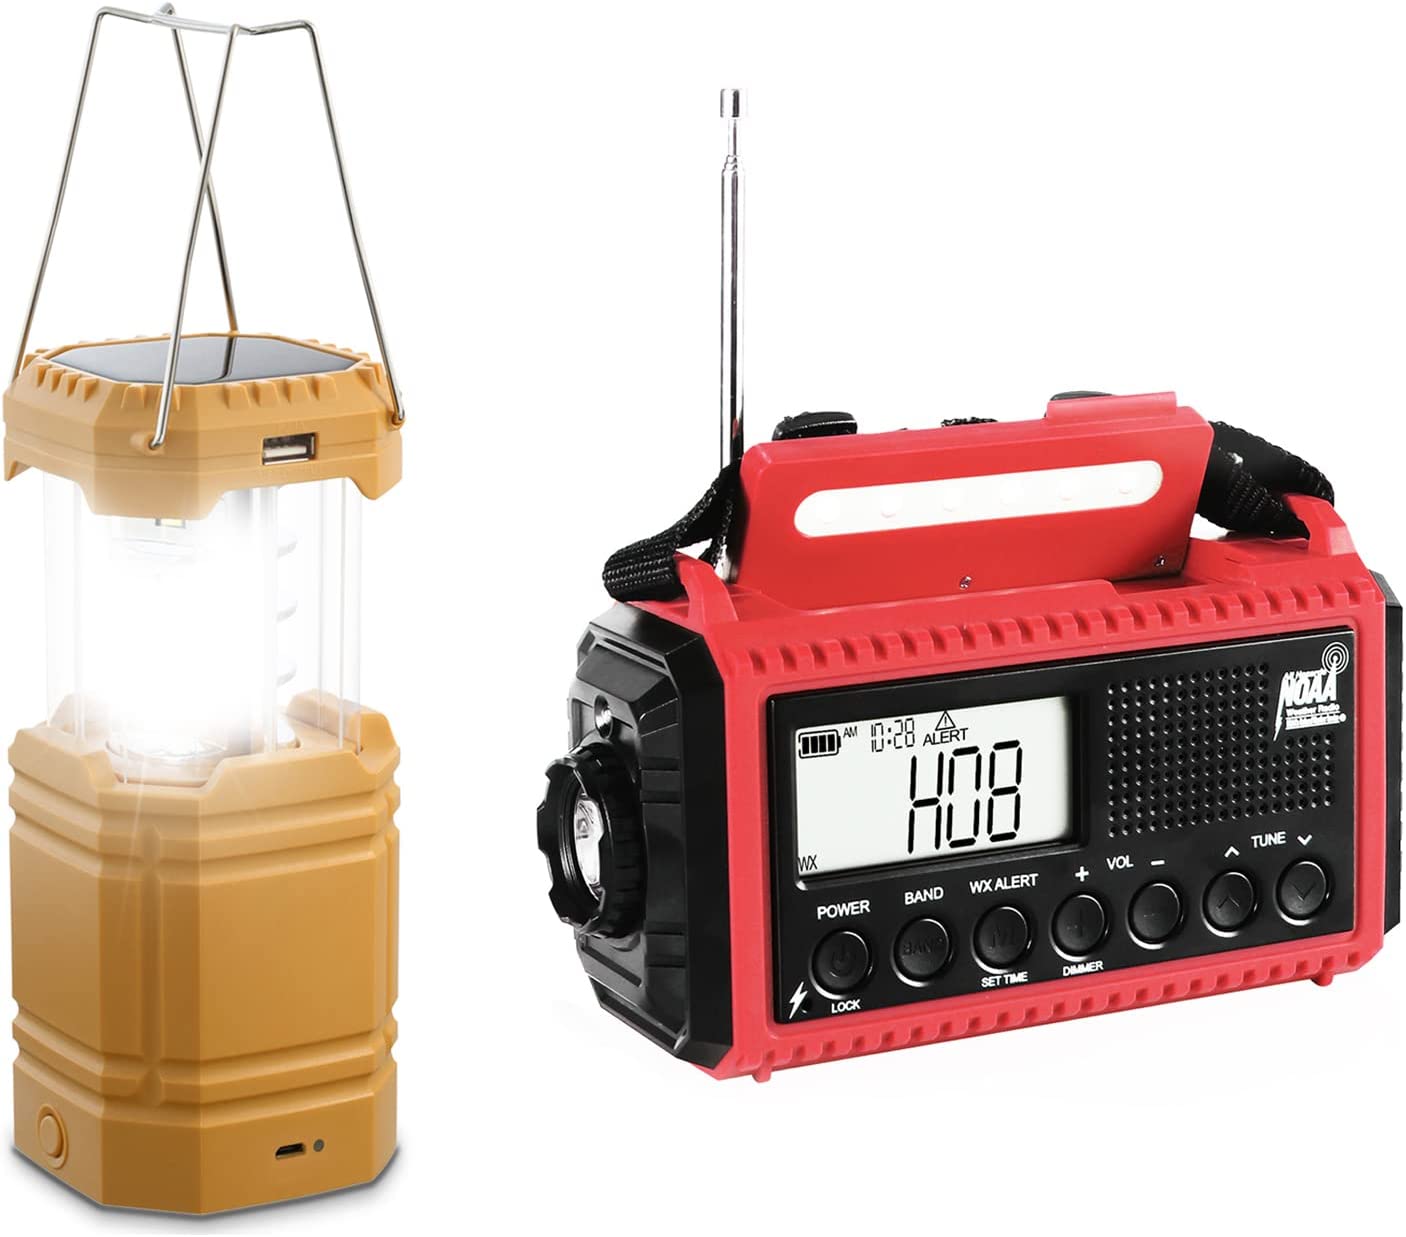 Emergency Hand Crank Solar Weather Radio & Camping Lantern Flashlight for Survival Kit, Hurricane & Outdoor, Multi Powered Ways & USB Charging Port for Home